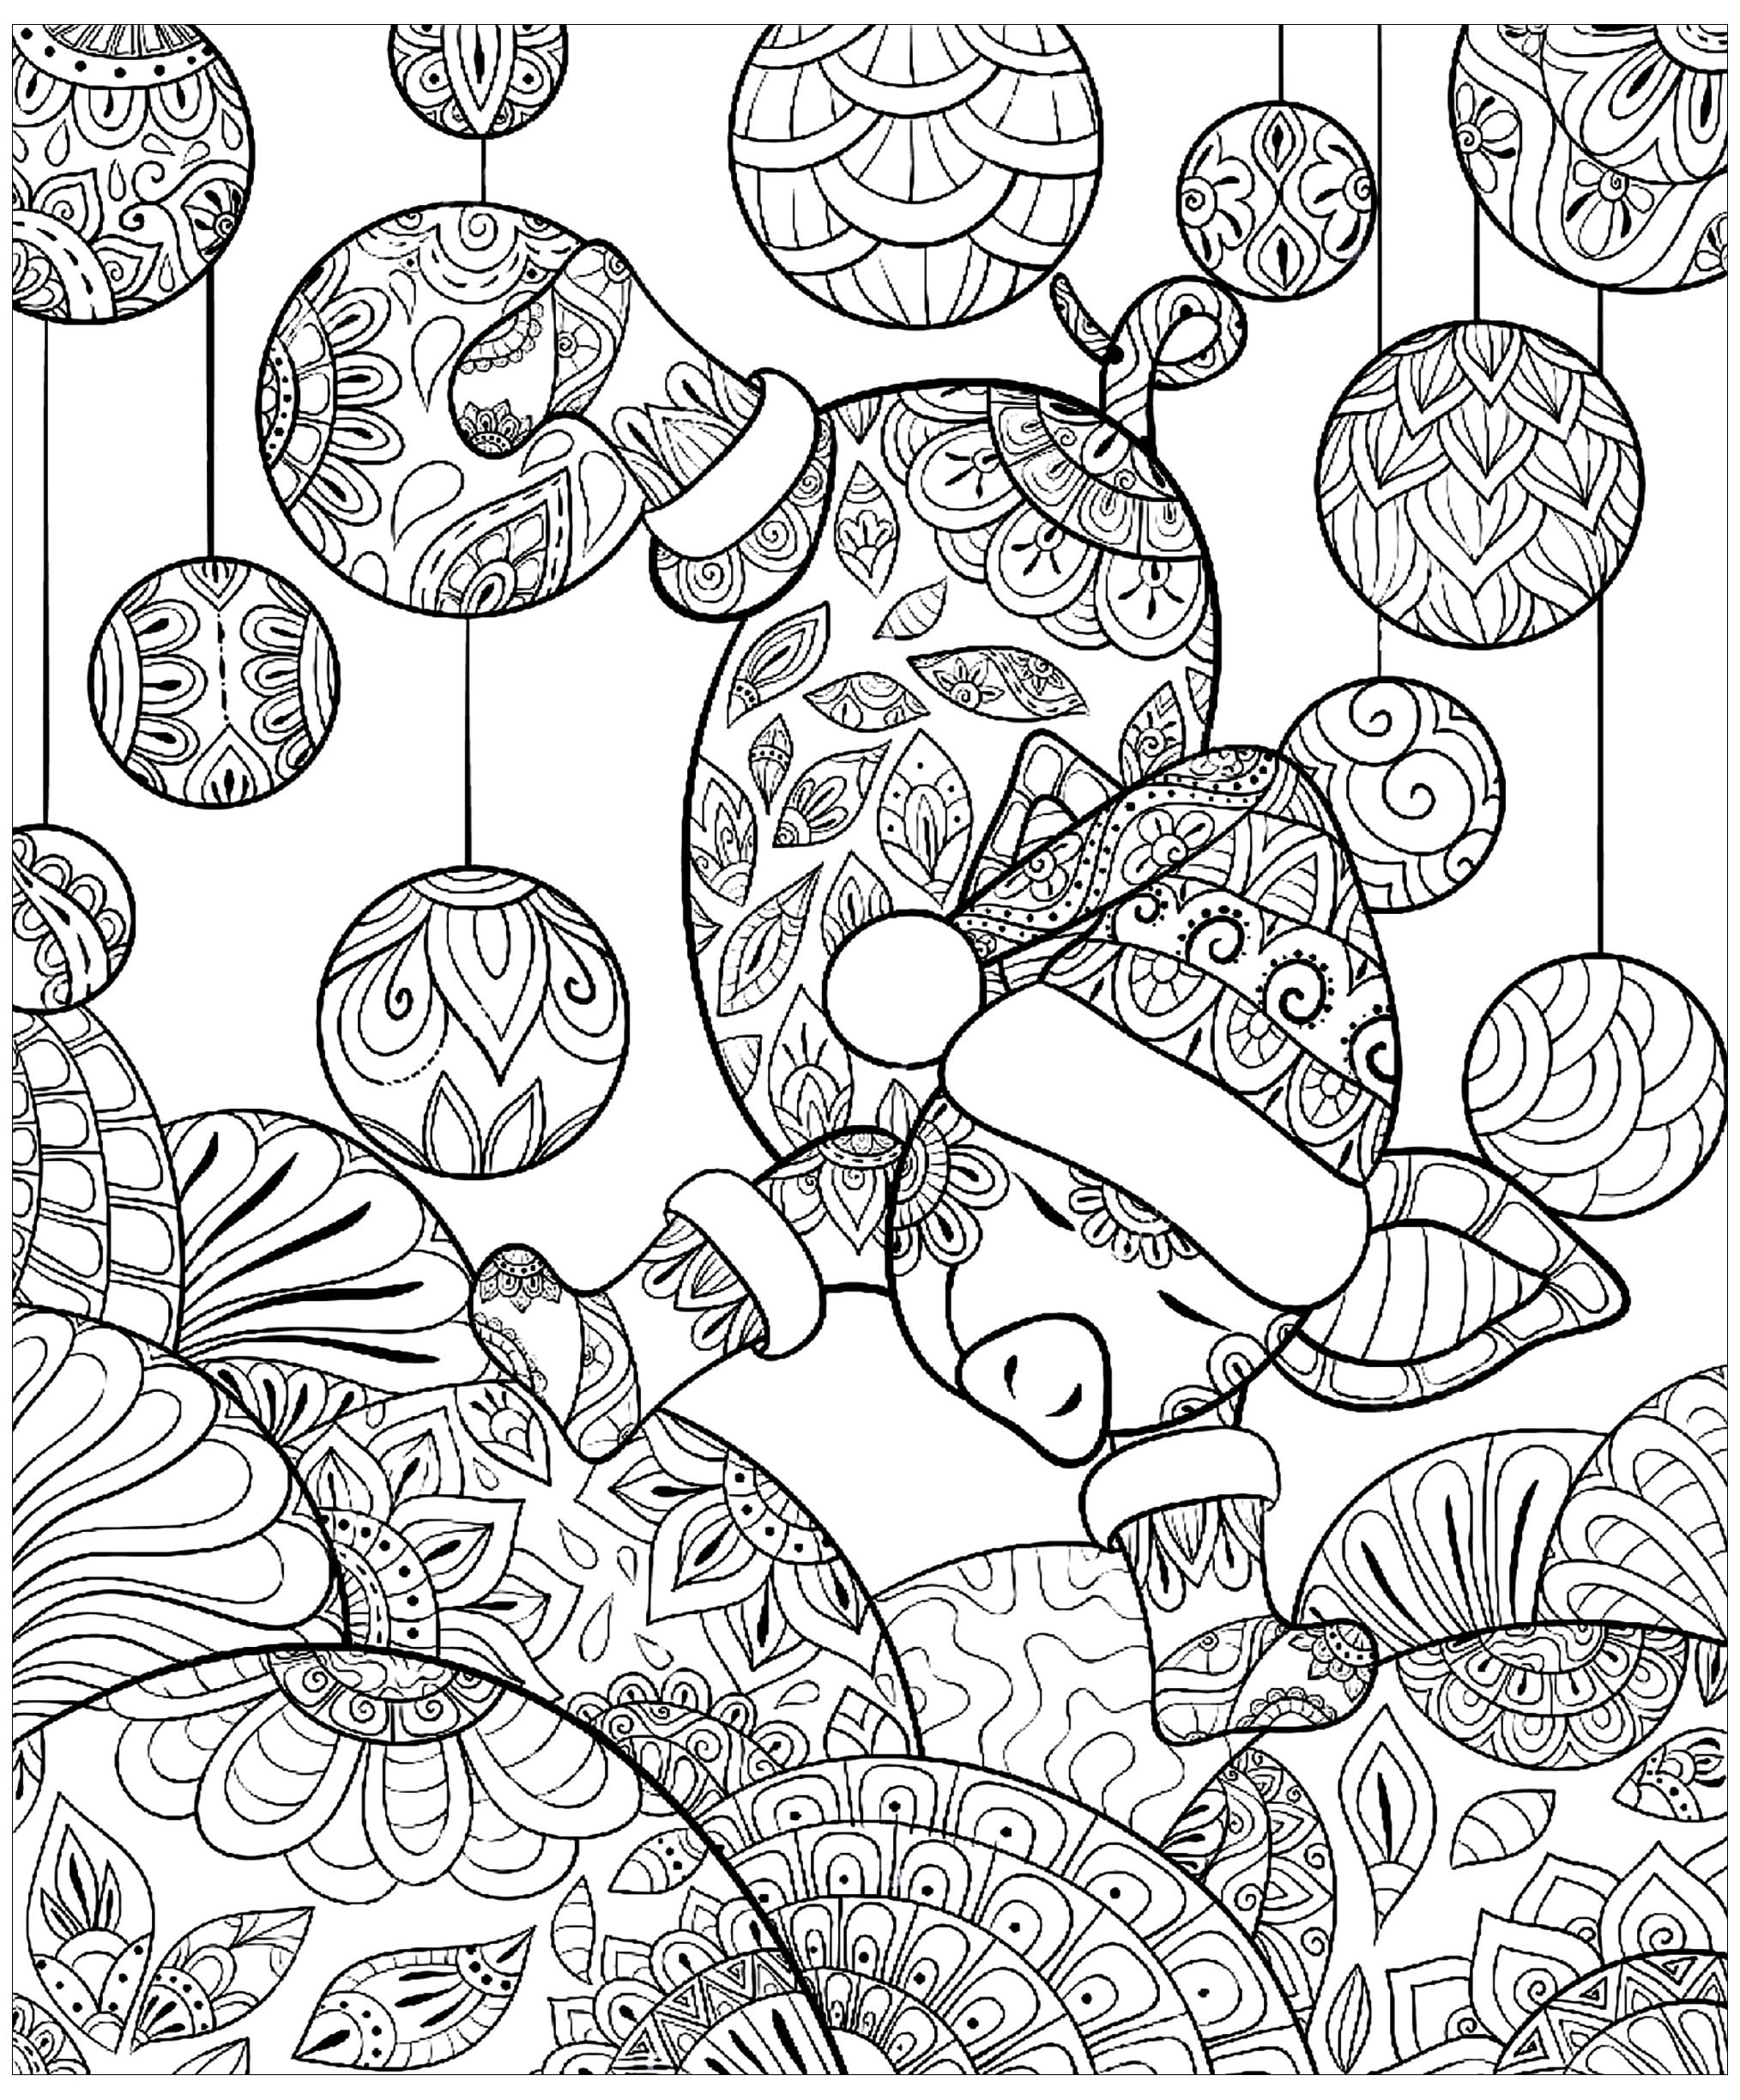 Pig christmas zentangle - Pigs Adult Coloring Pages